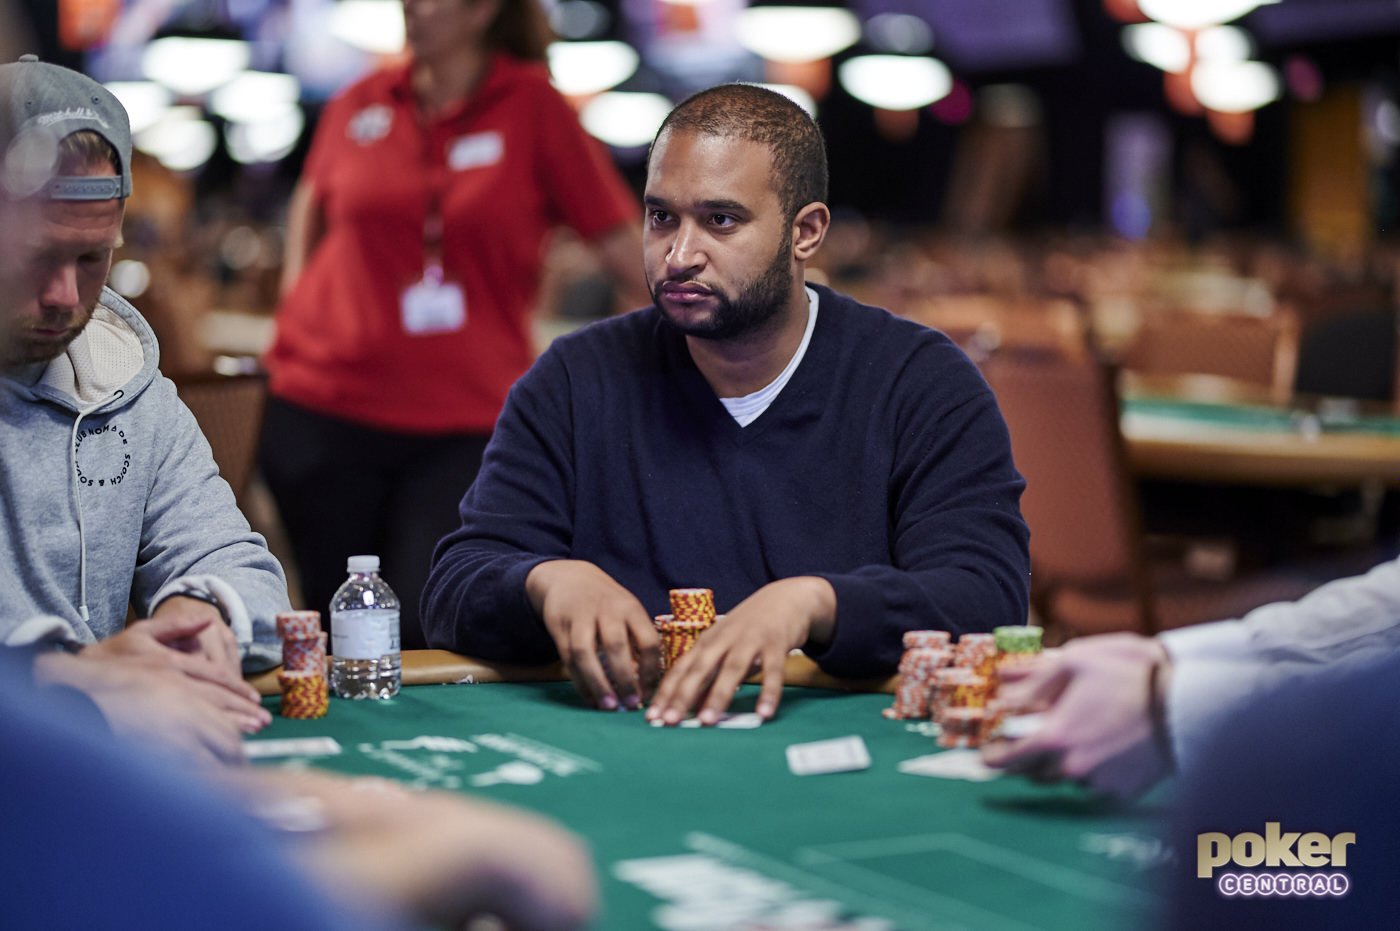 Ismael Bojang has 10 cashes and his first WSOP gold bracelet in 2019 to put himself in contention for Player of the Year.